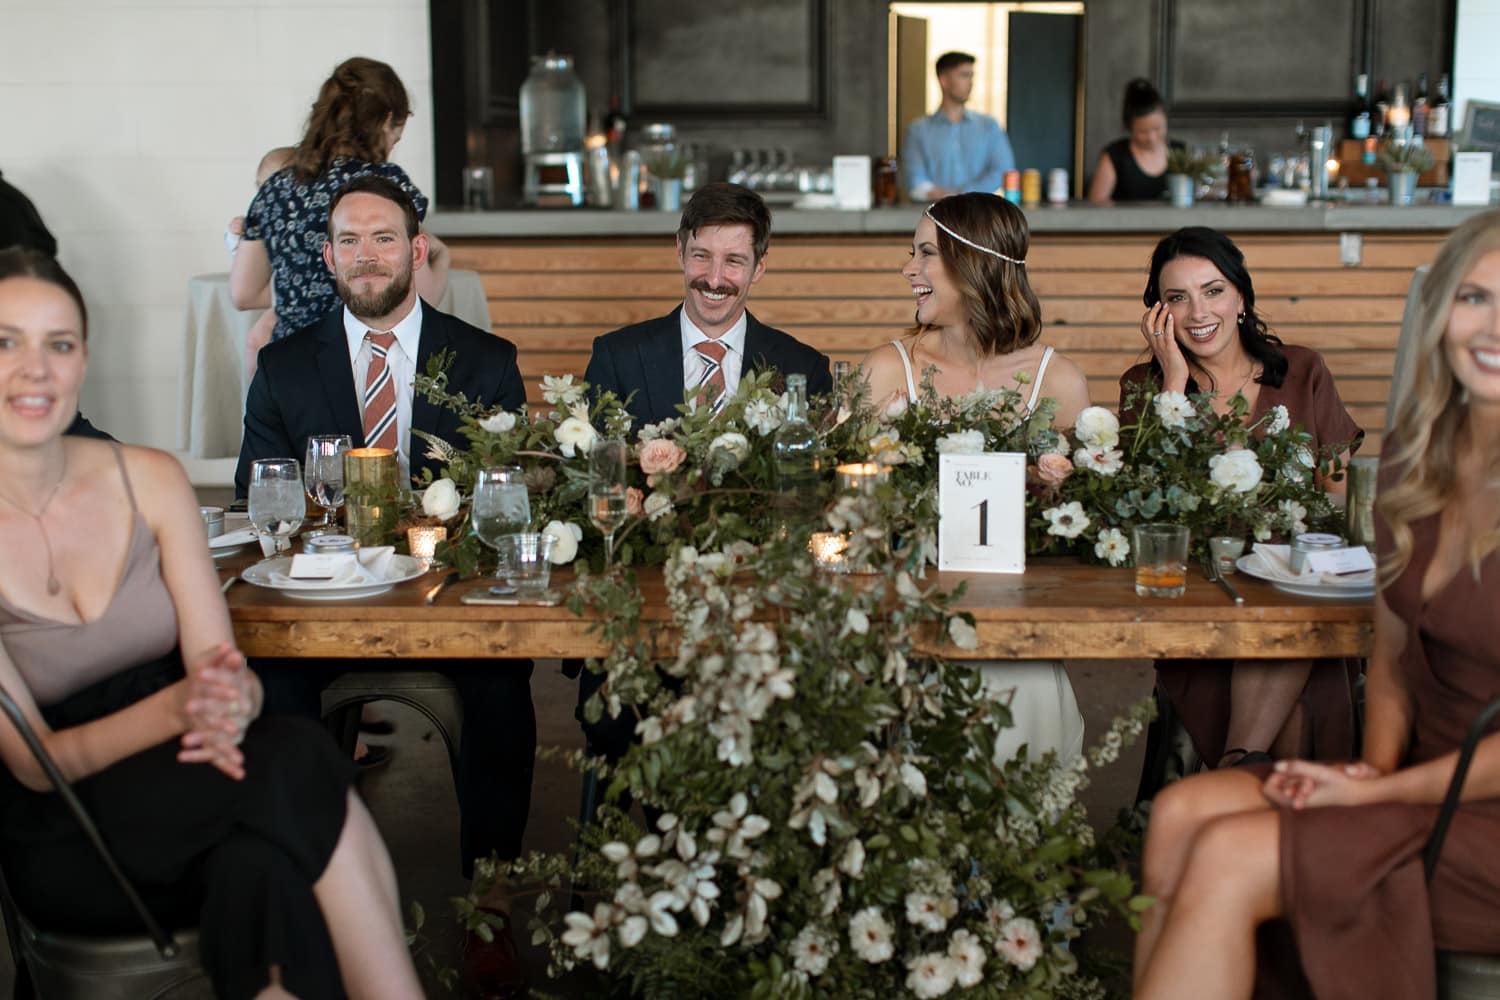 Bride and groom sitting at a table with white and greenery running down the centerpiece. There are candles. There are pops of peach in the roses. It looks very modern. Their friends are all laughing together.